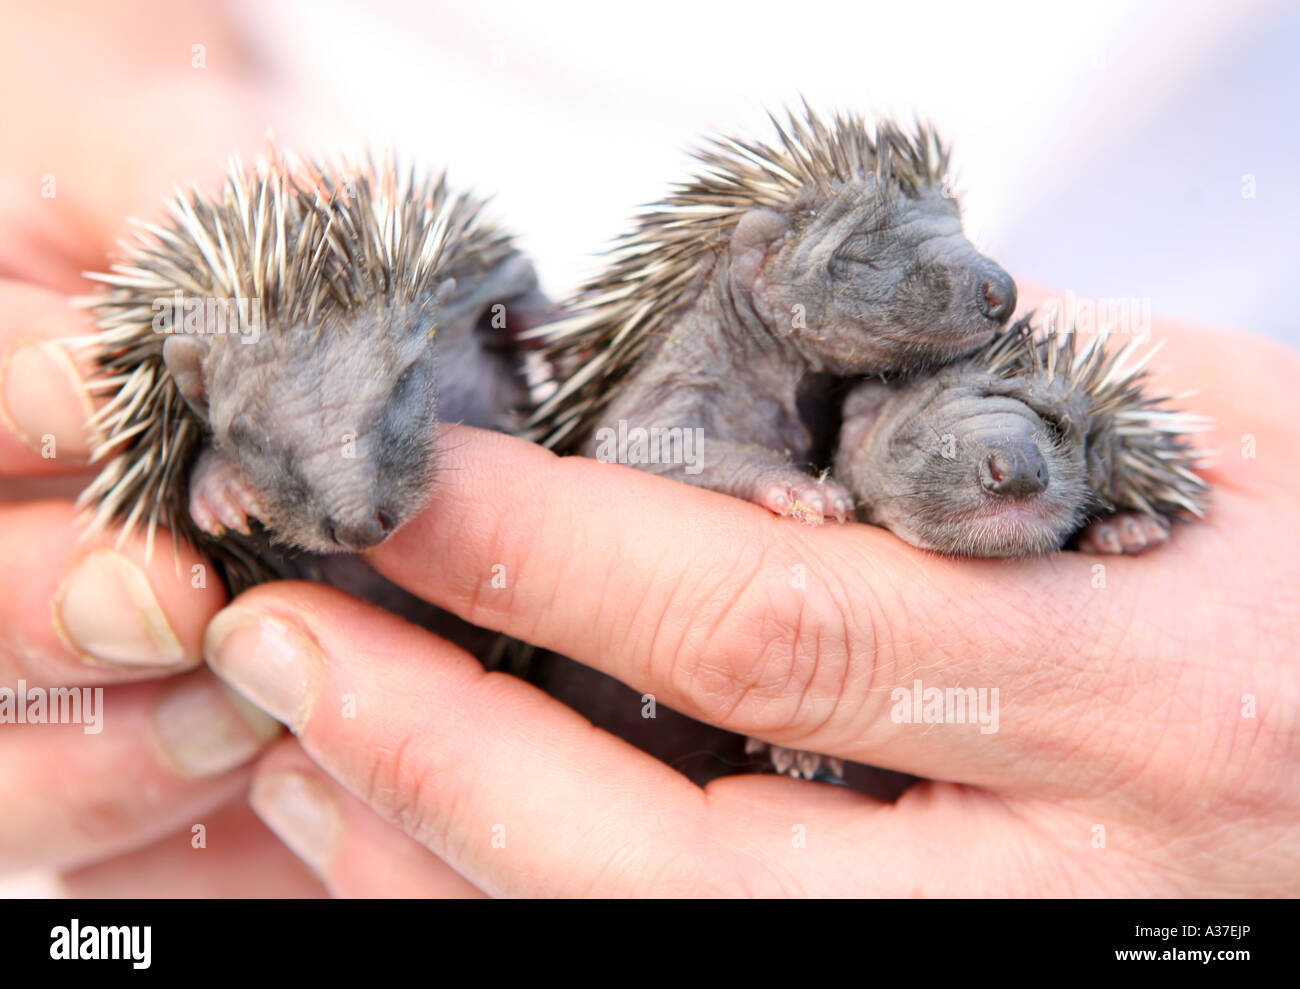 Three tiny baby hedgehogs are hand reared after being found abandoned. Stock Photo